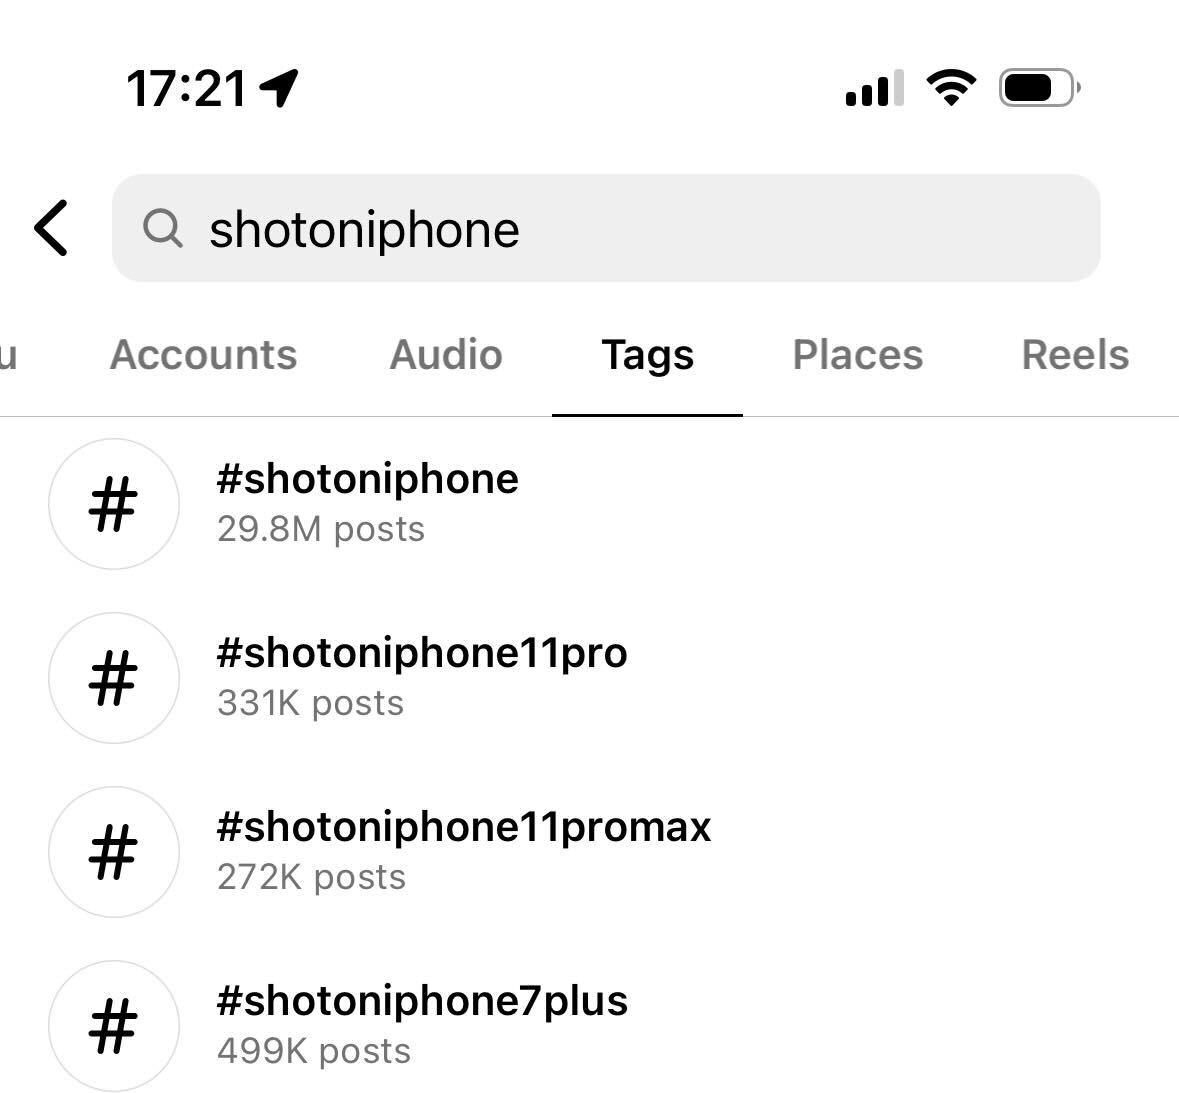 A social media advertising example from iPhone: the hashtags from the #shotoniphone campaign